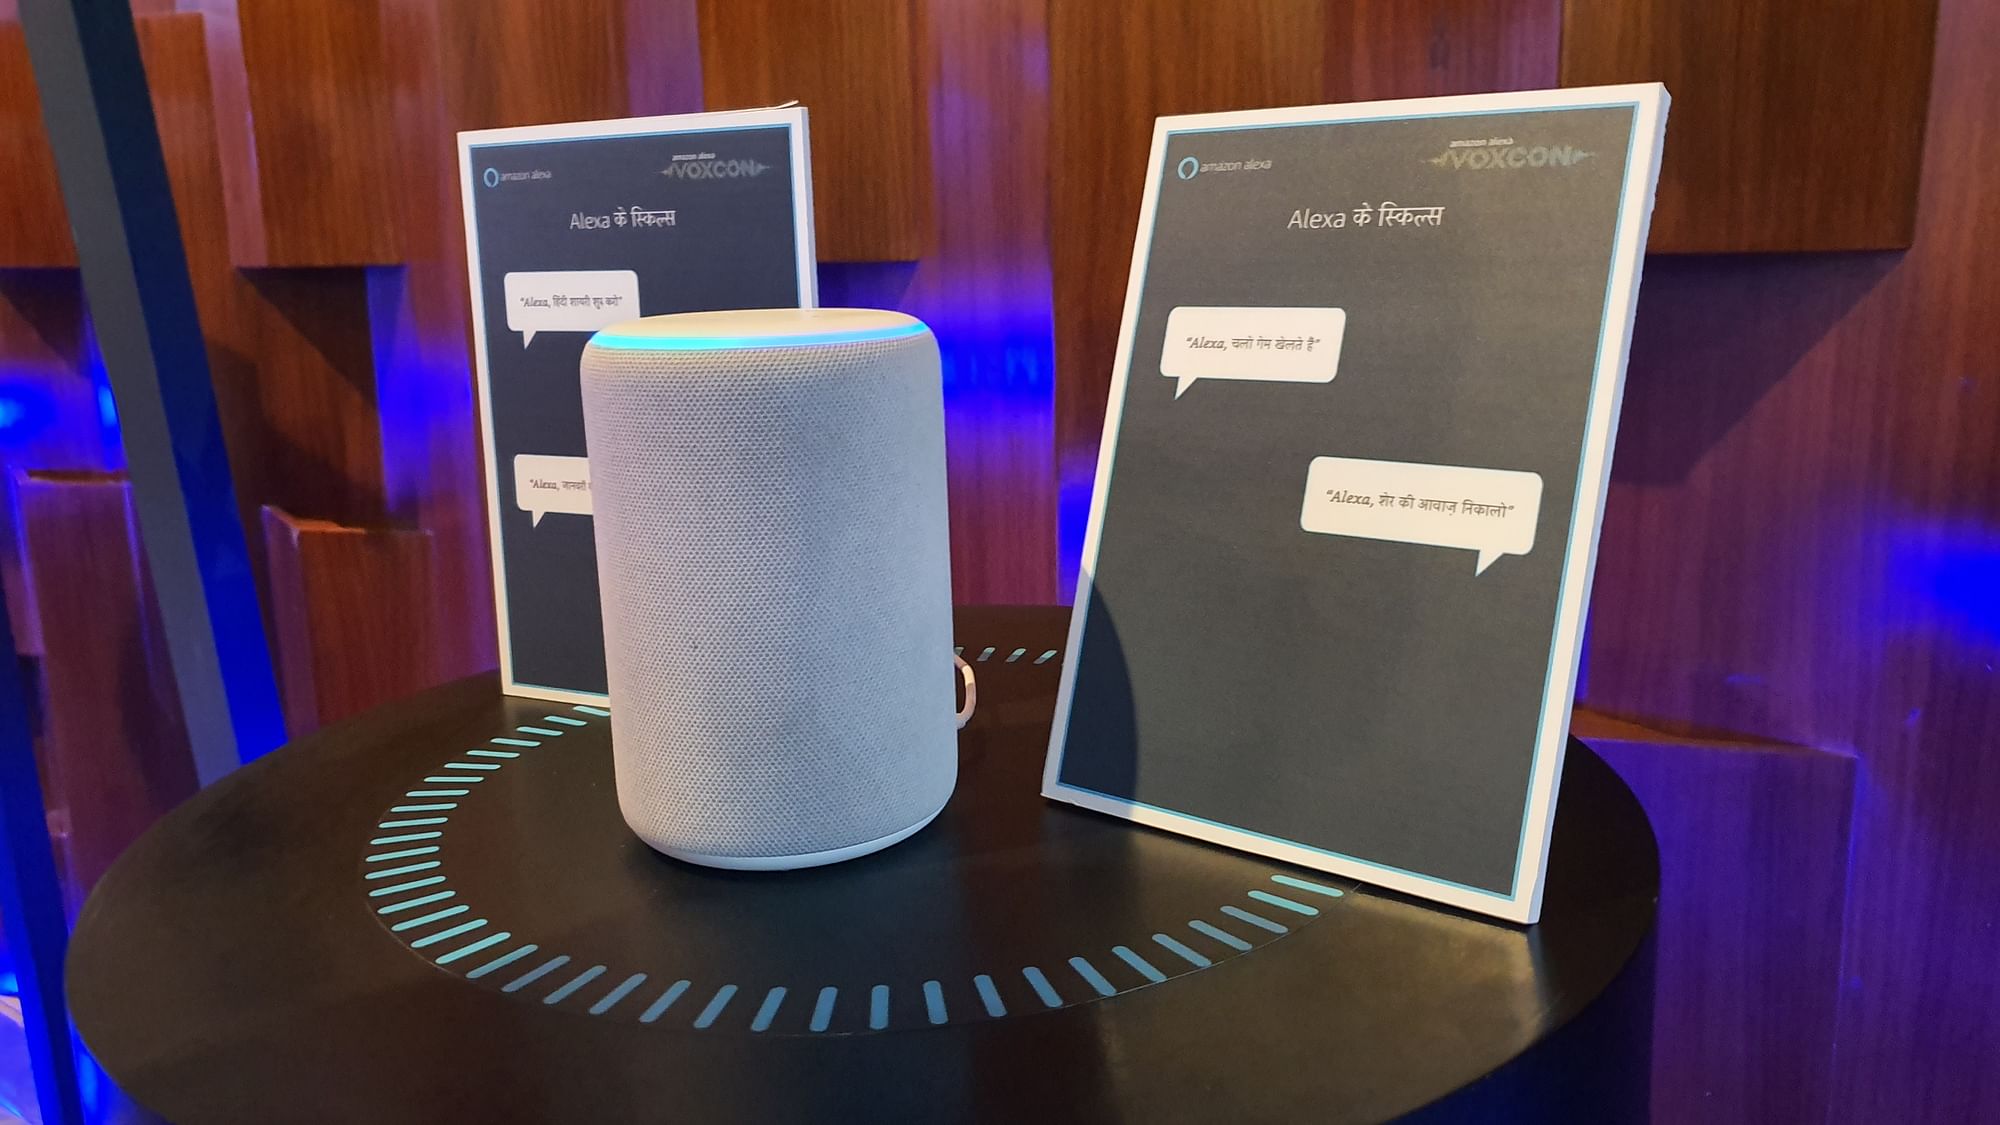 Alexa devices will now support Hindi.